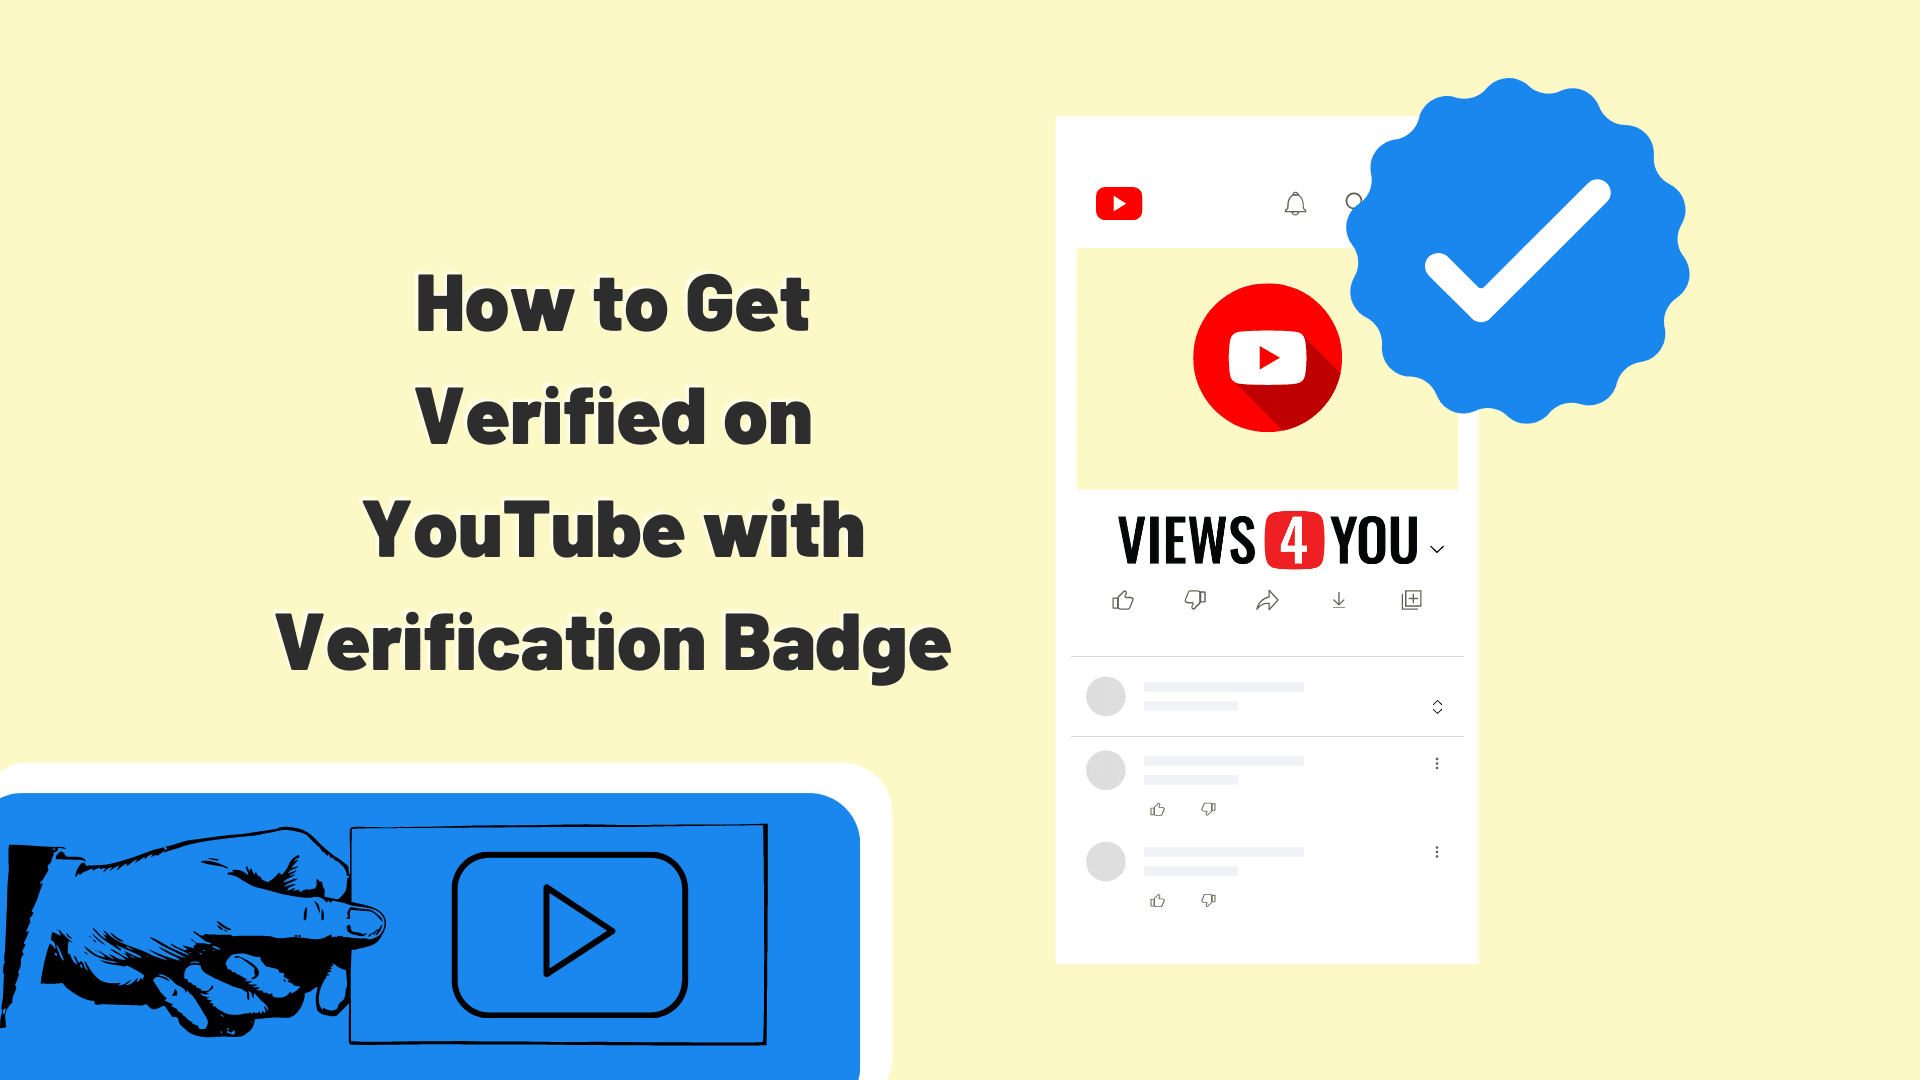 How to Get Verified on YouTube with Verification Badge